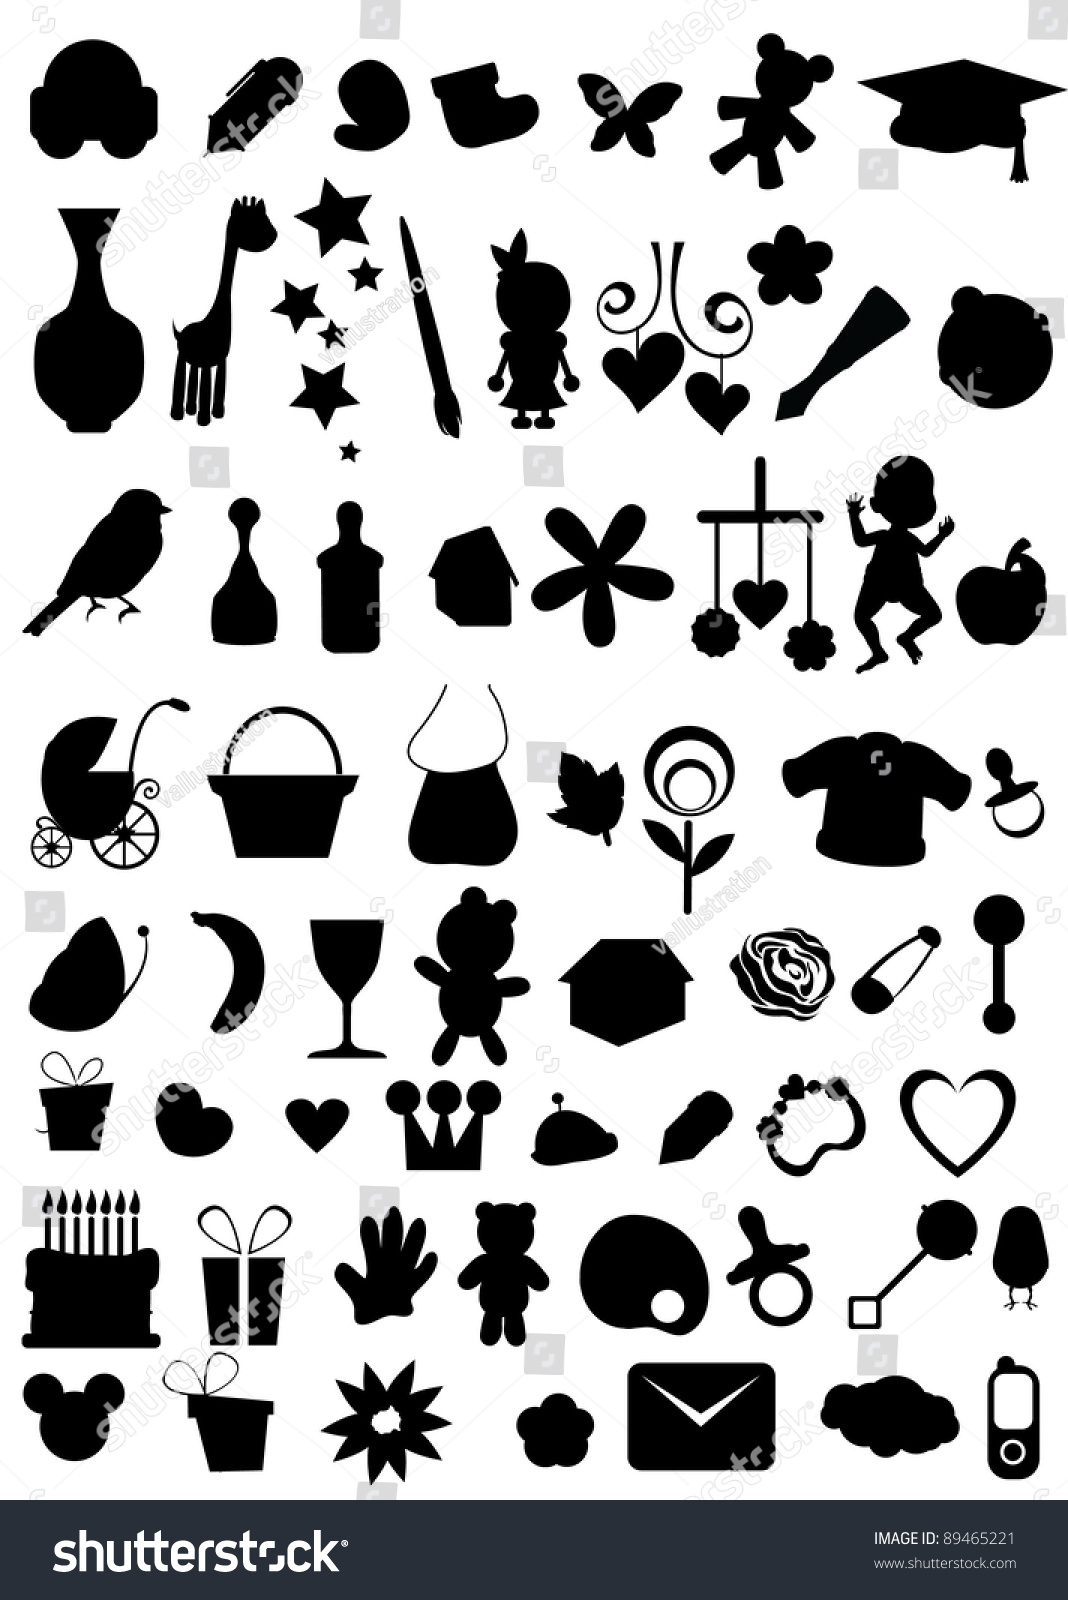 clipart web collections missing - photo #40